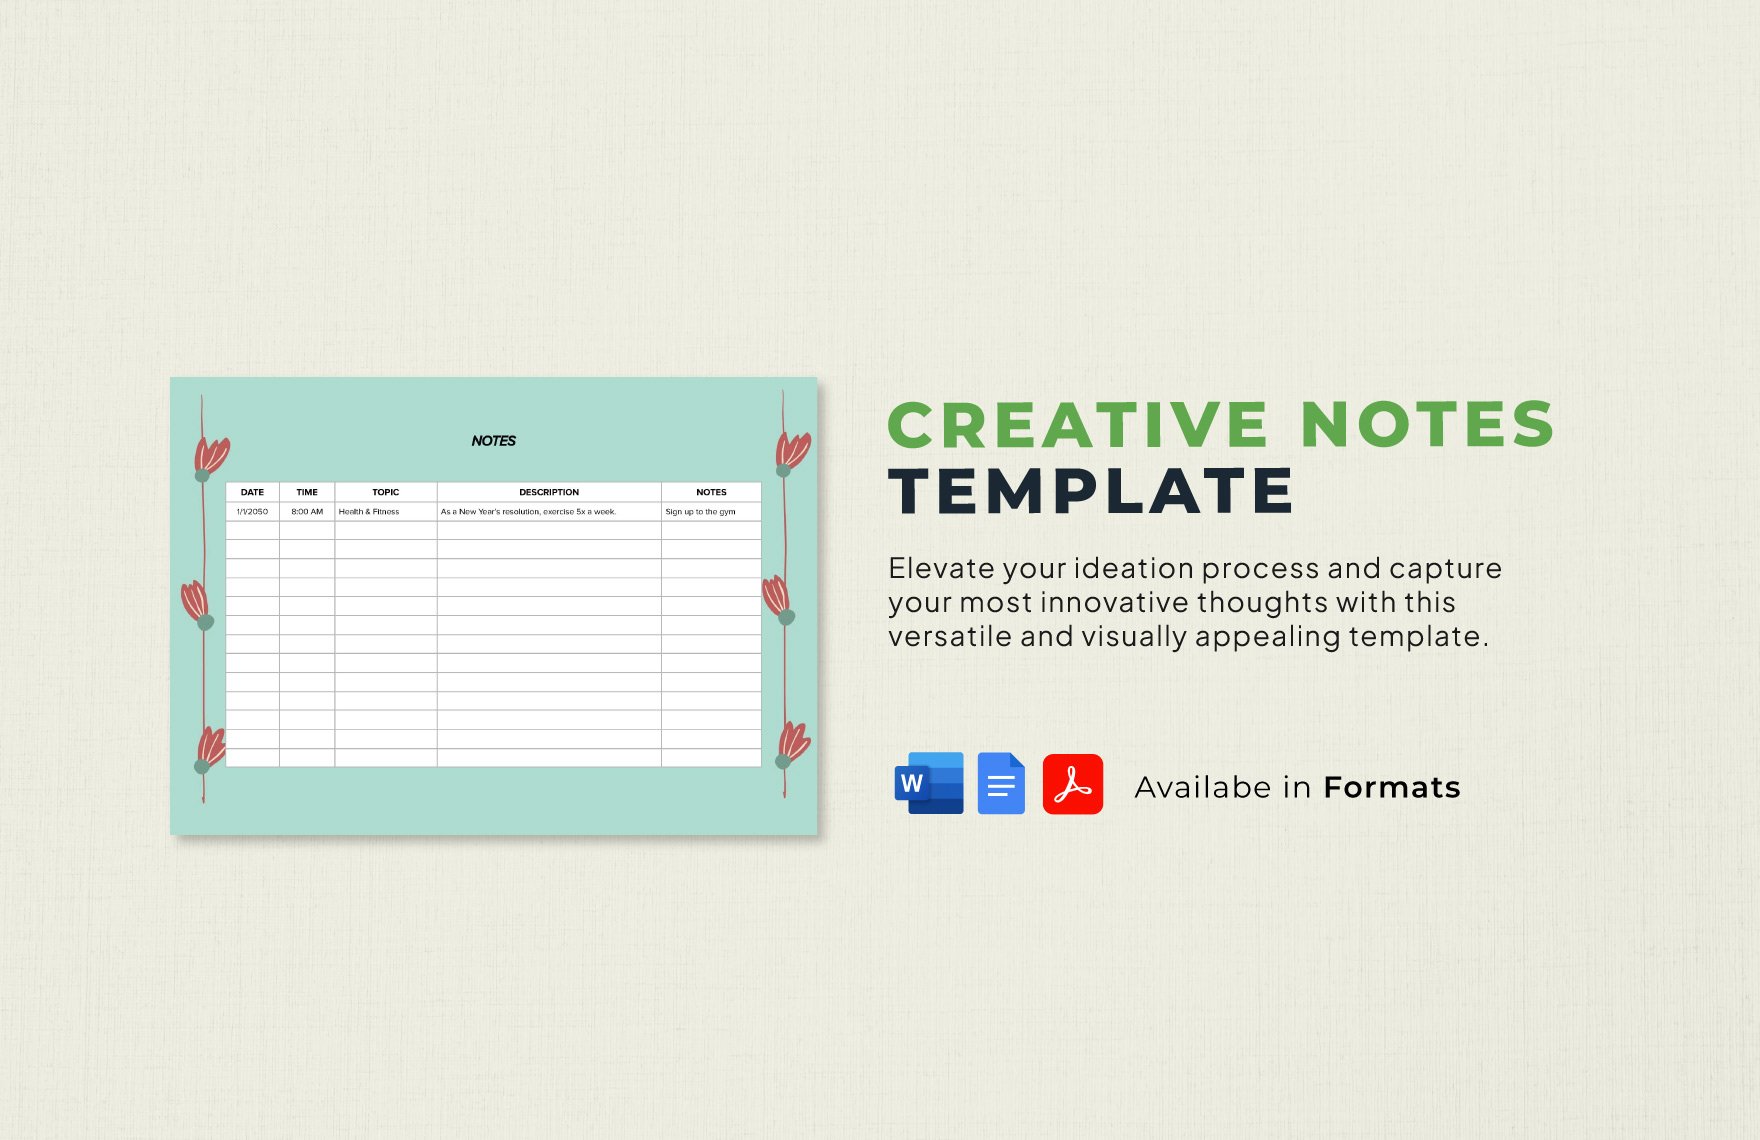 Creative Notes Template